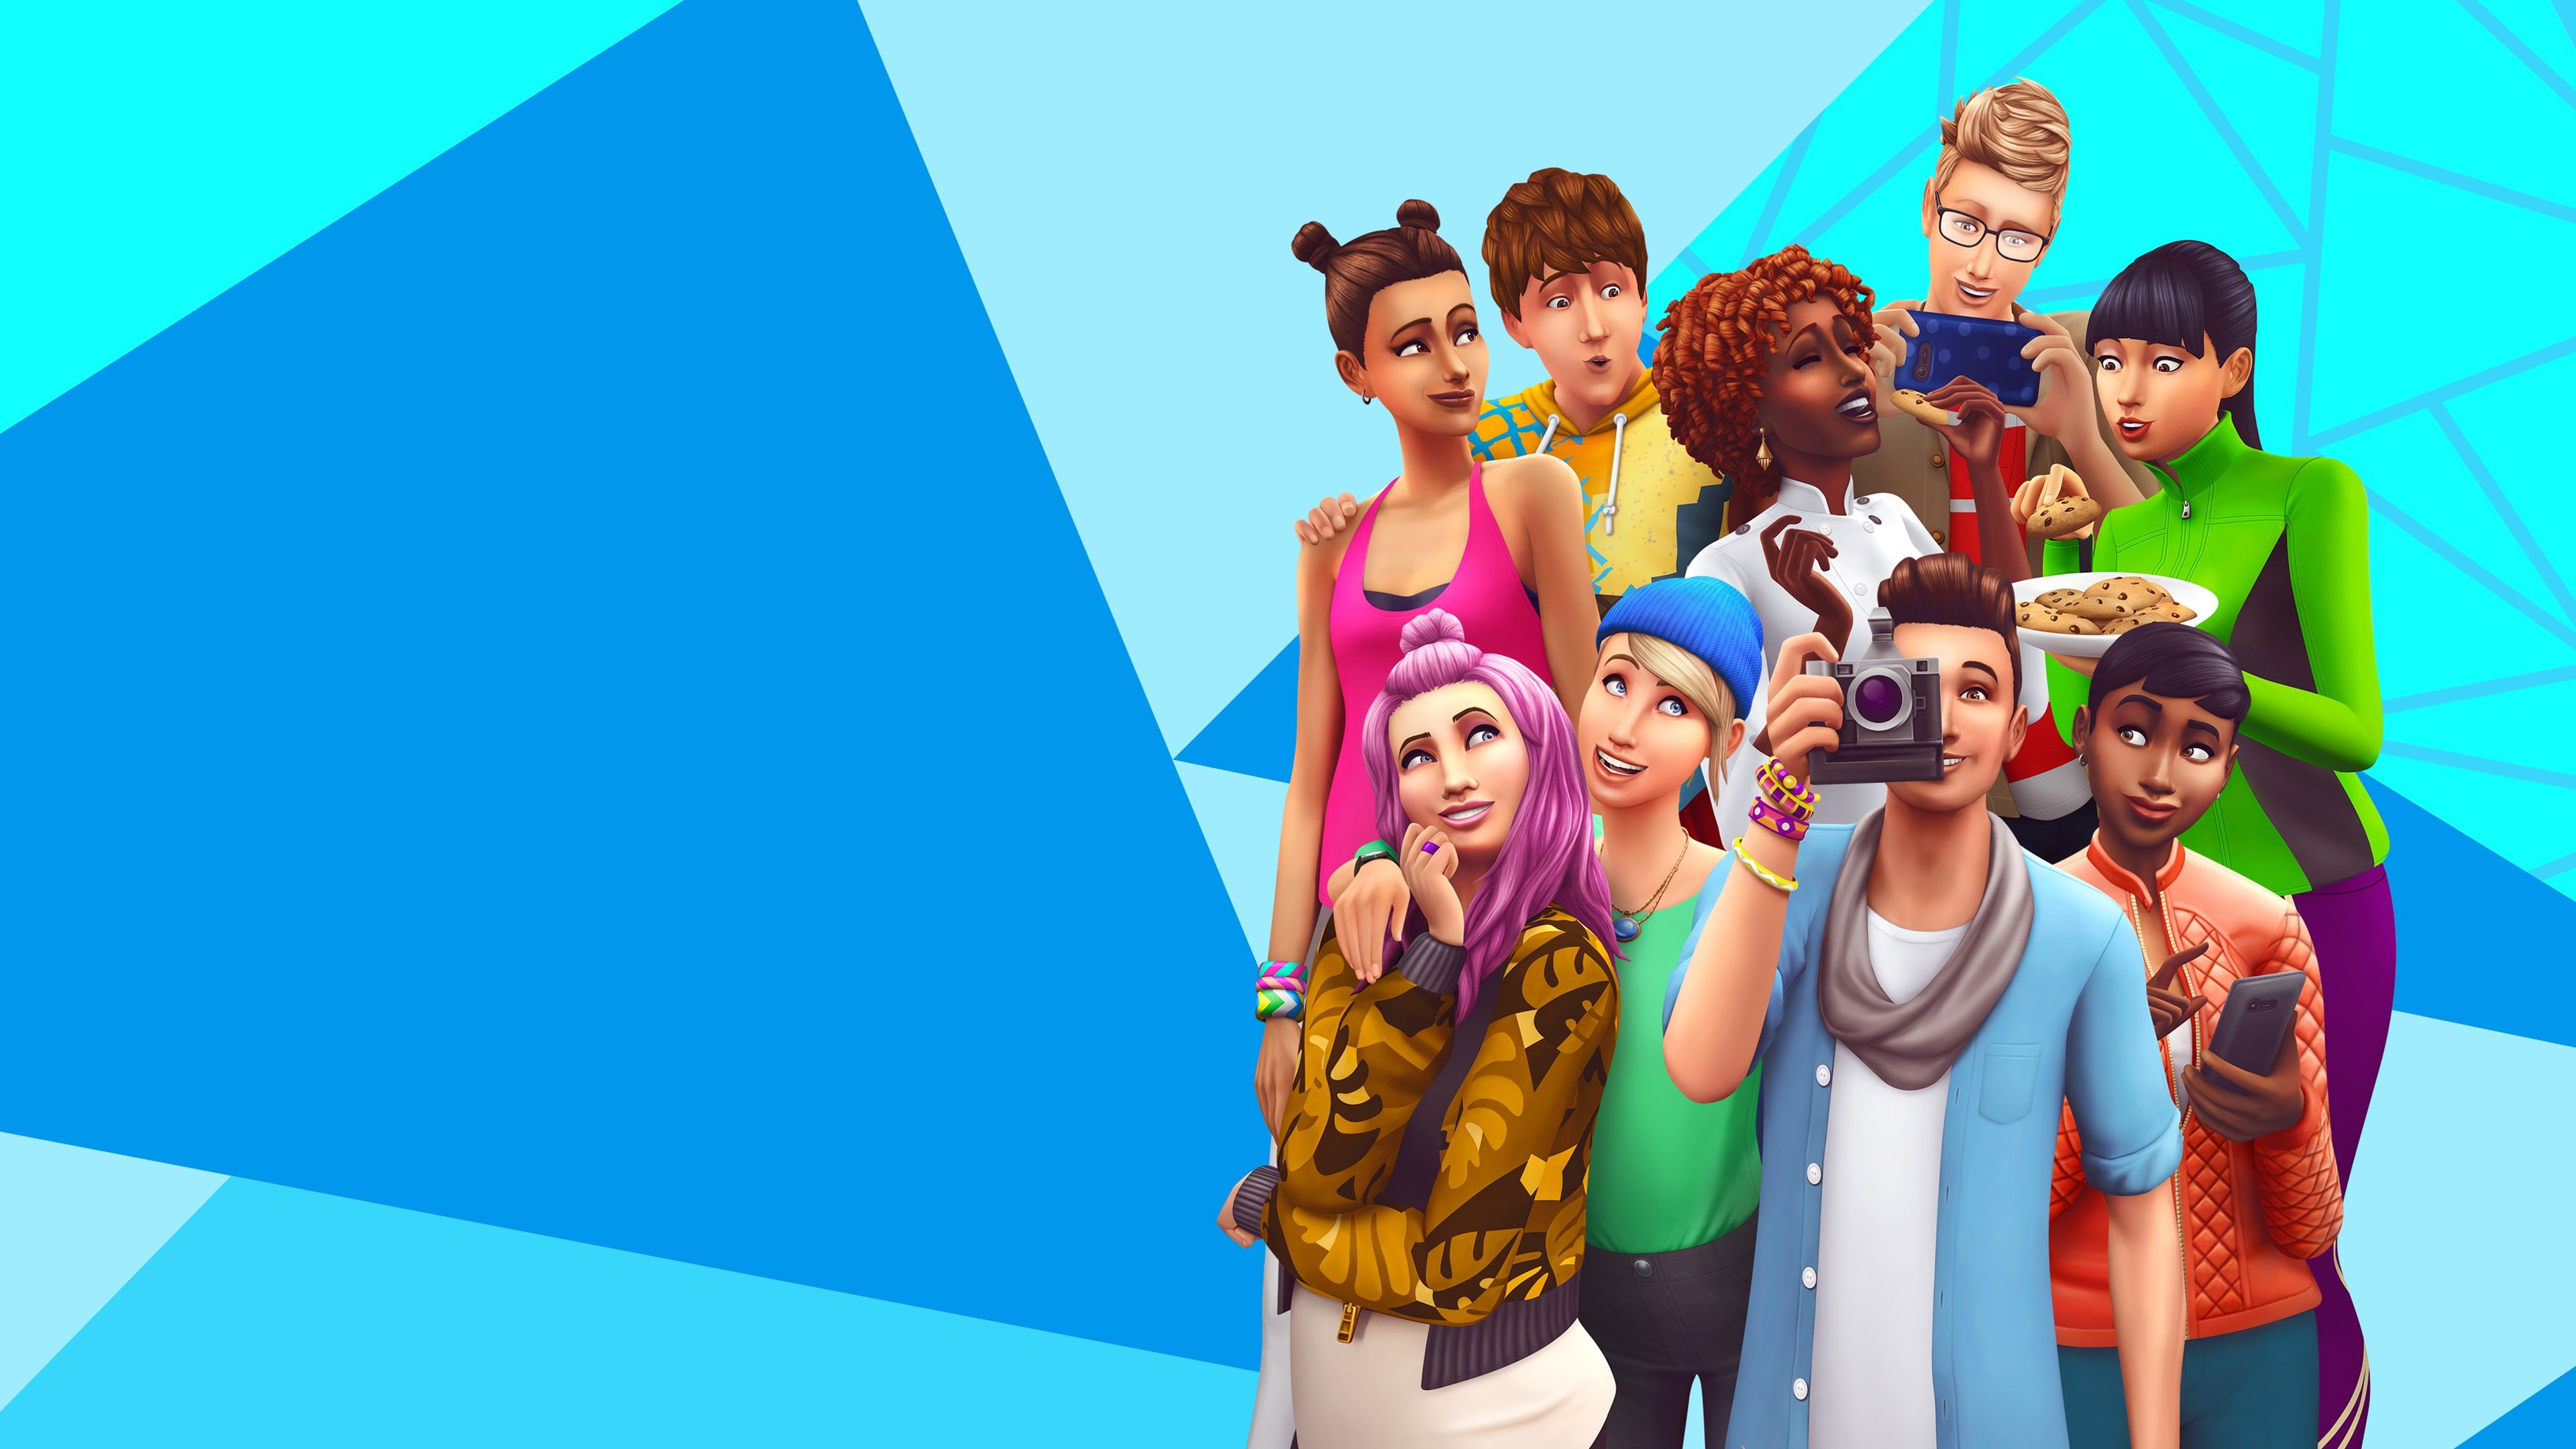 The Sims 4 cover image